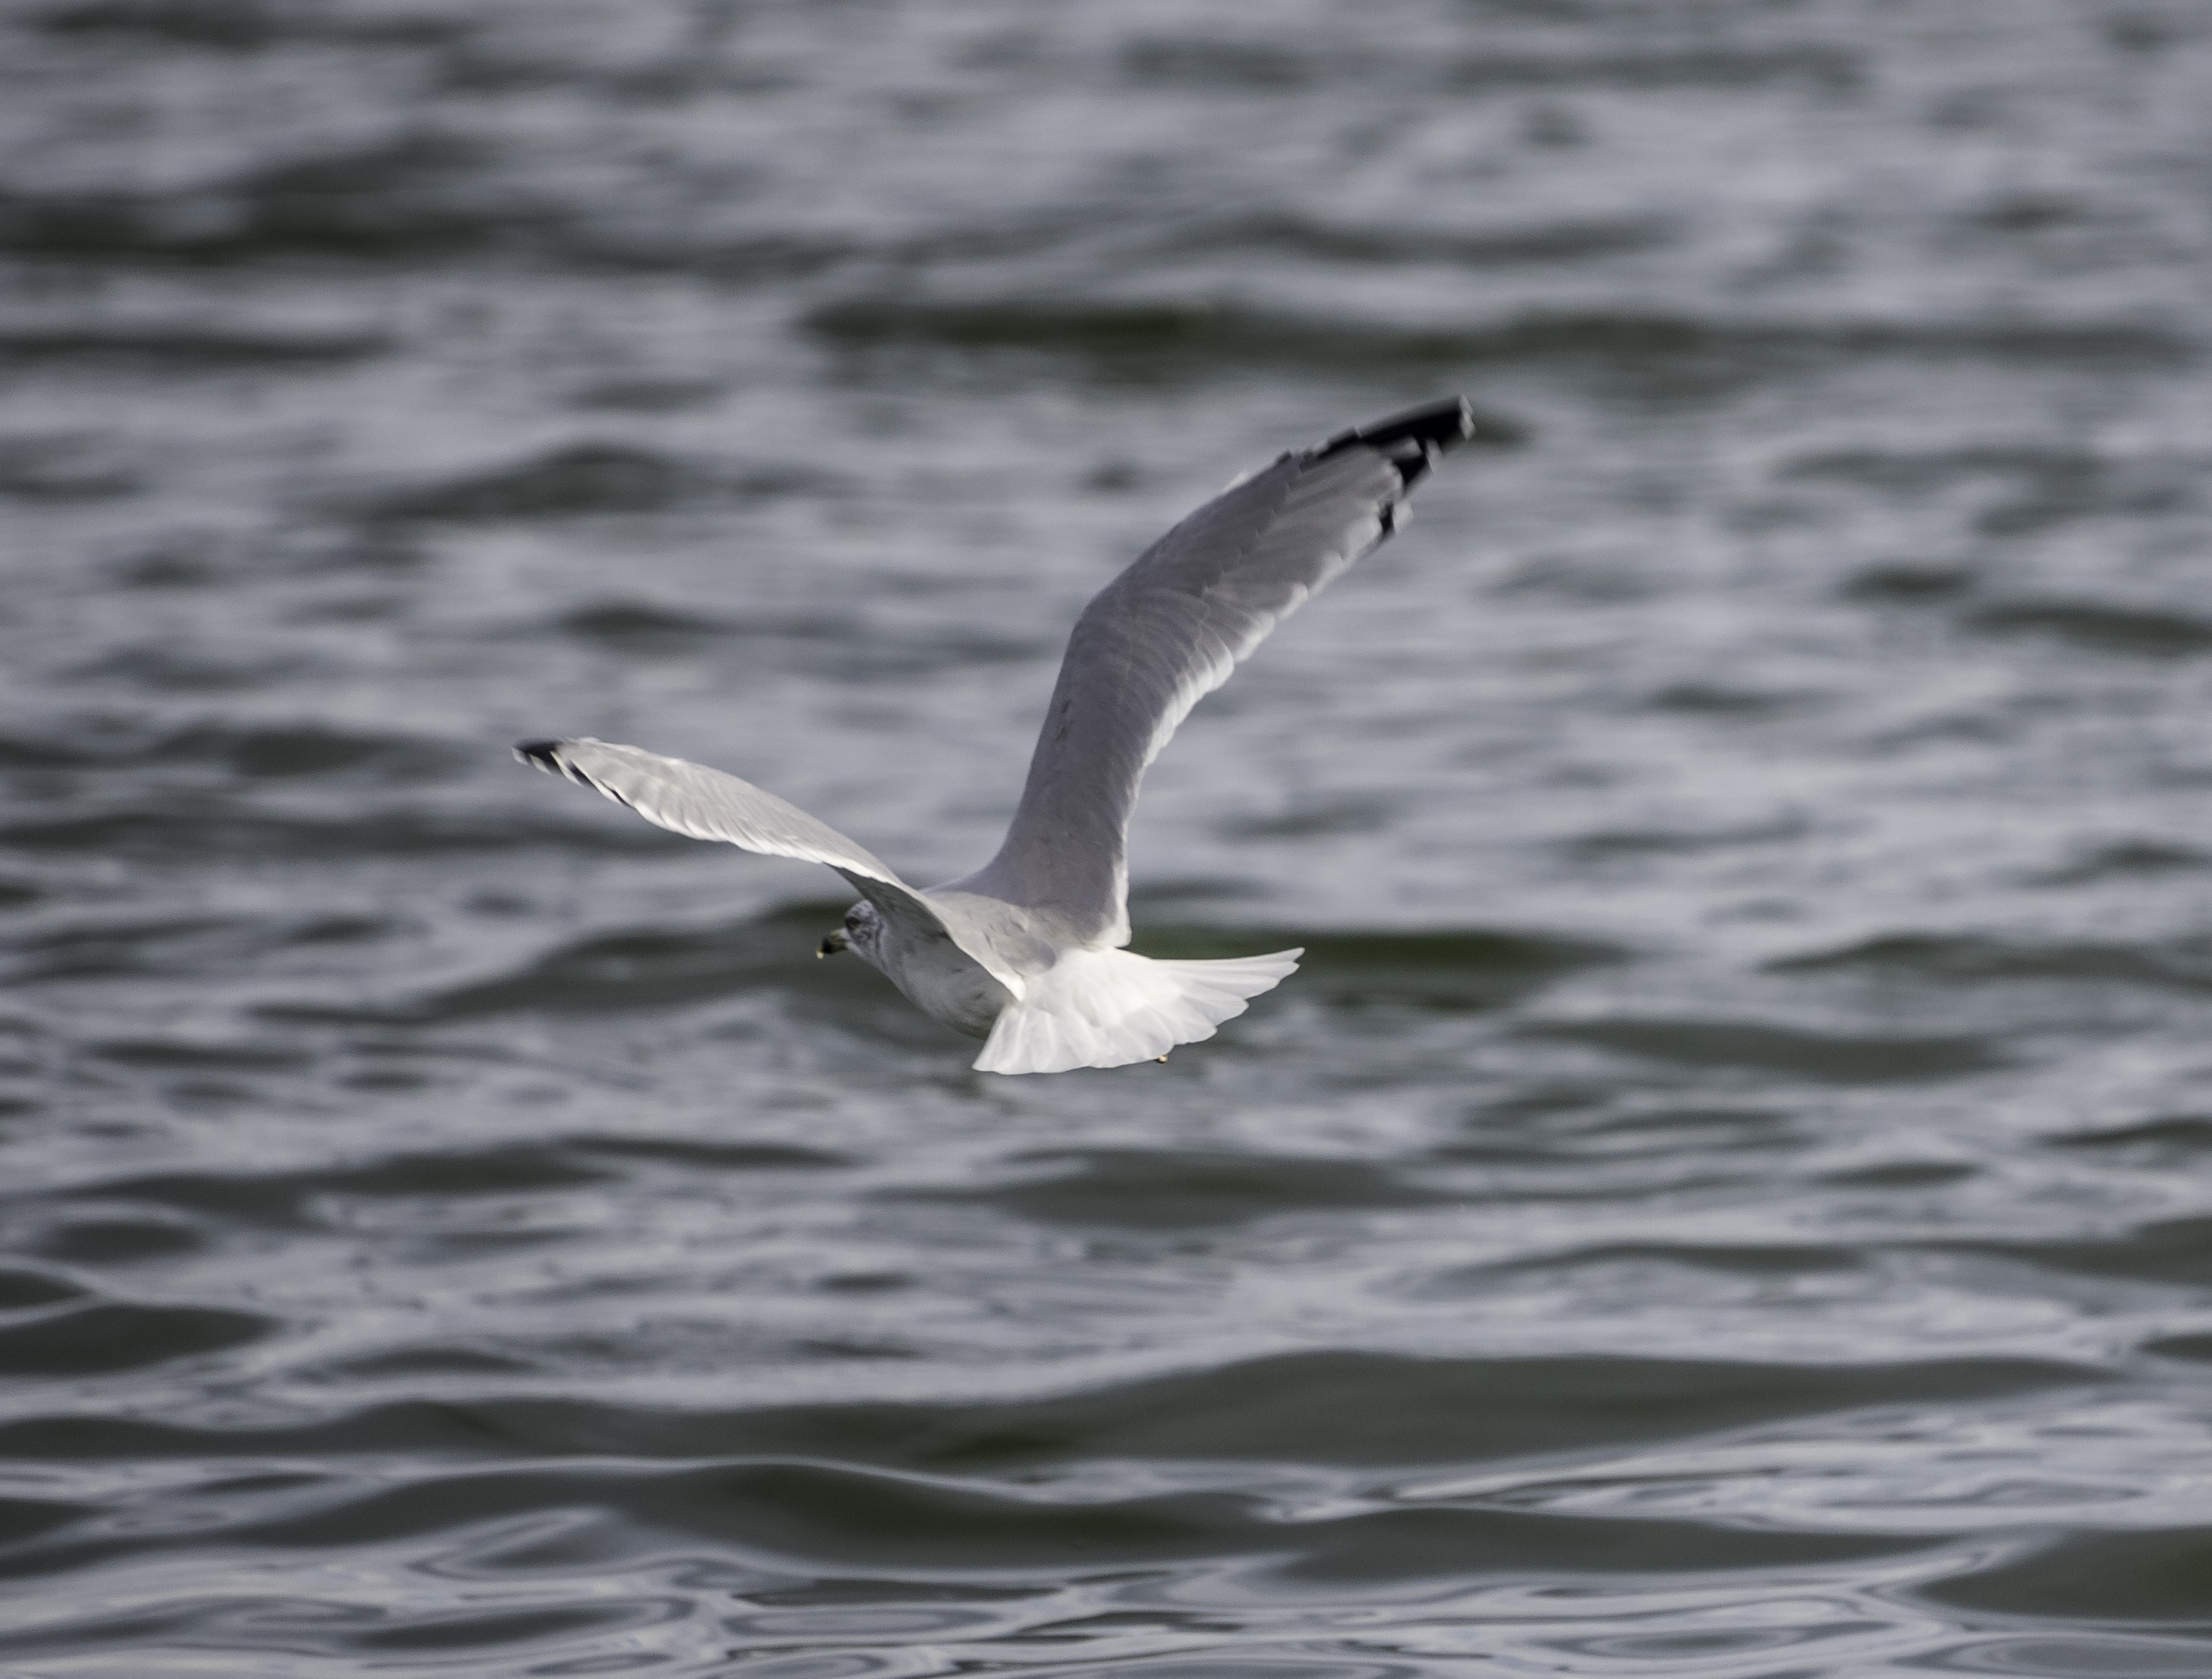 Flying Seagull over the water image - Free stock photo - Public ...